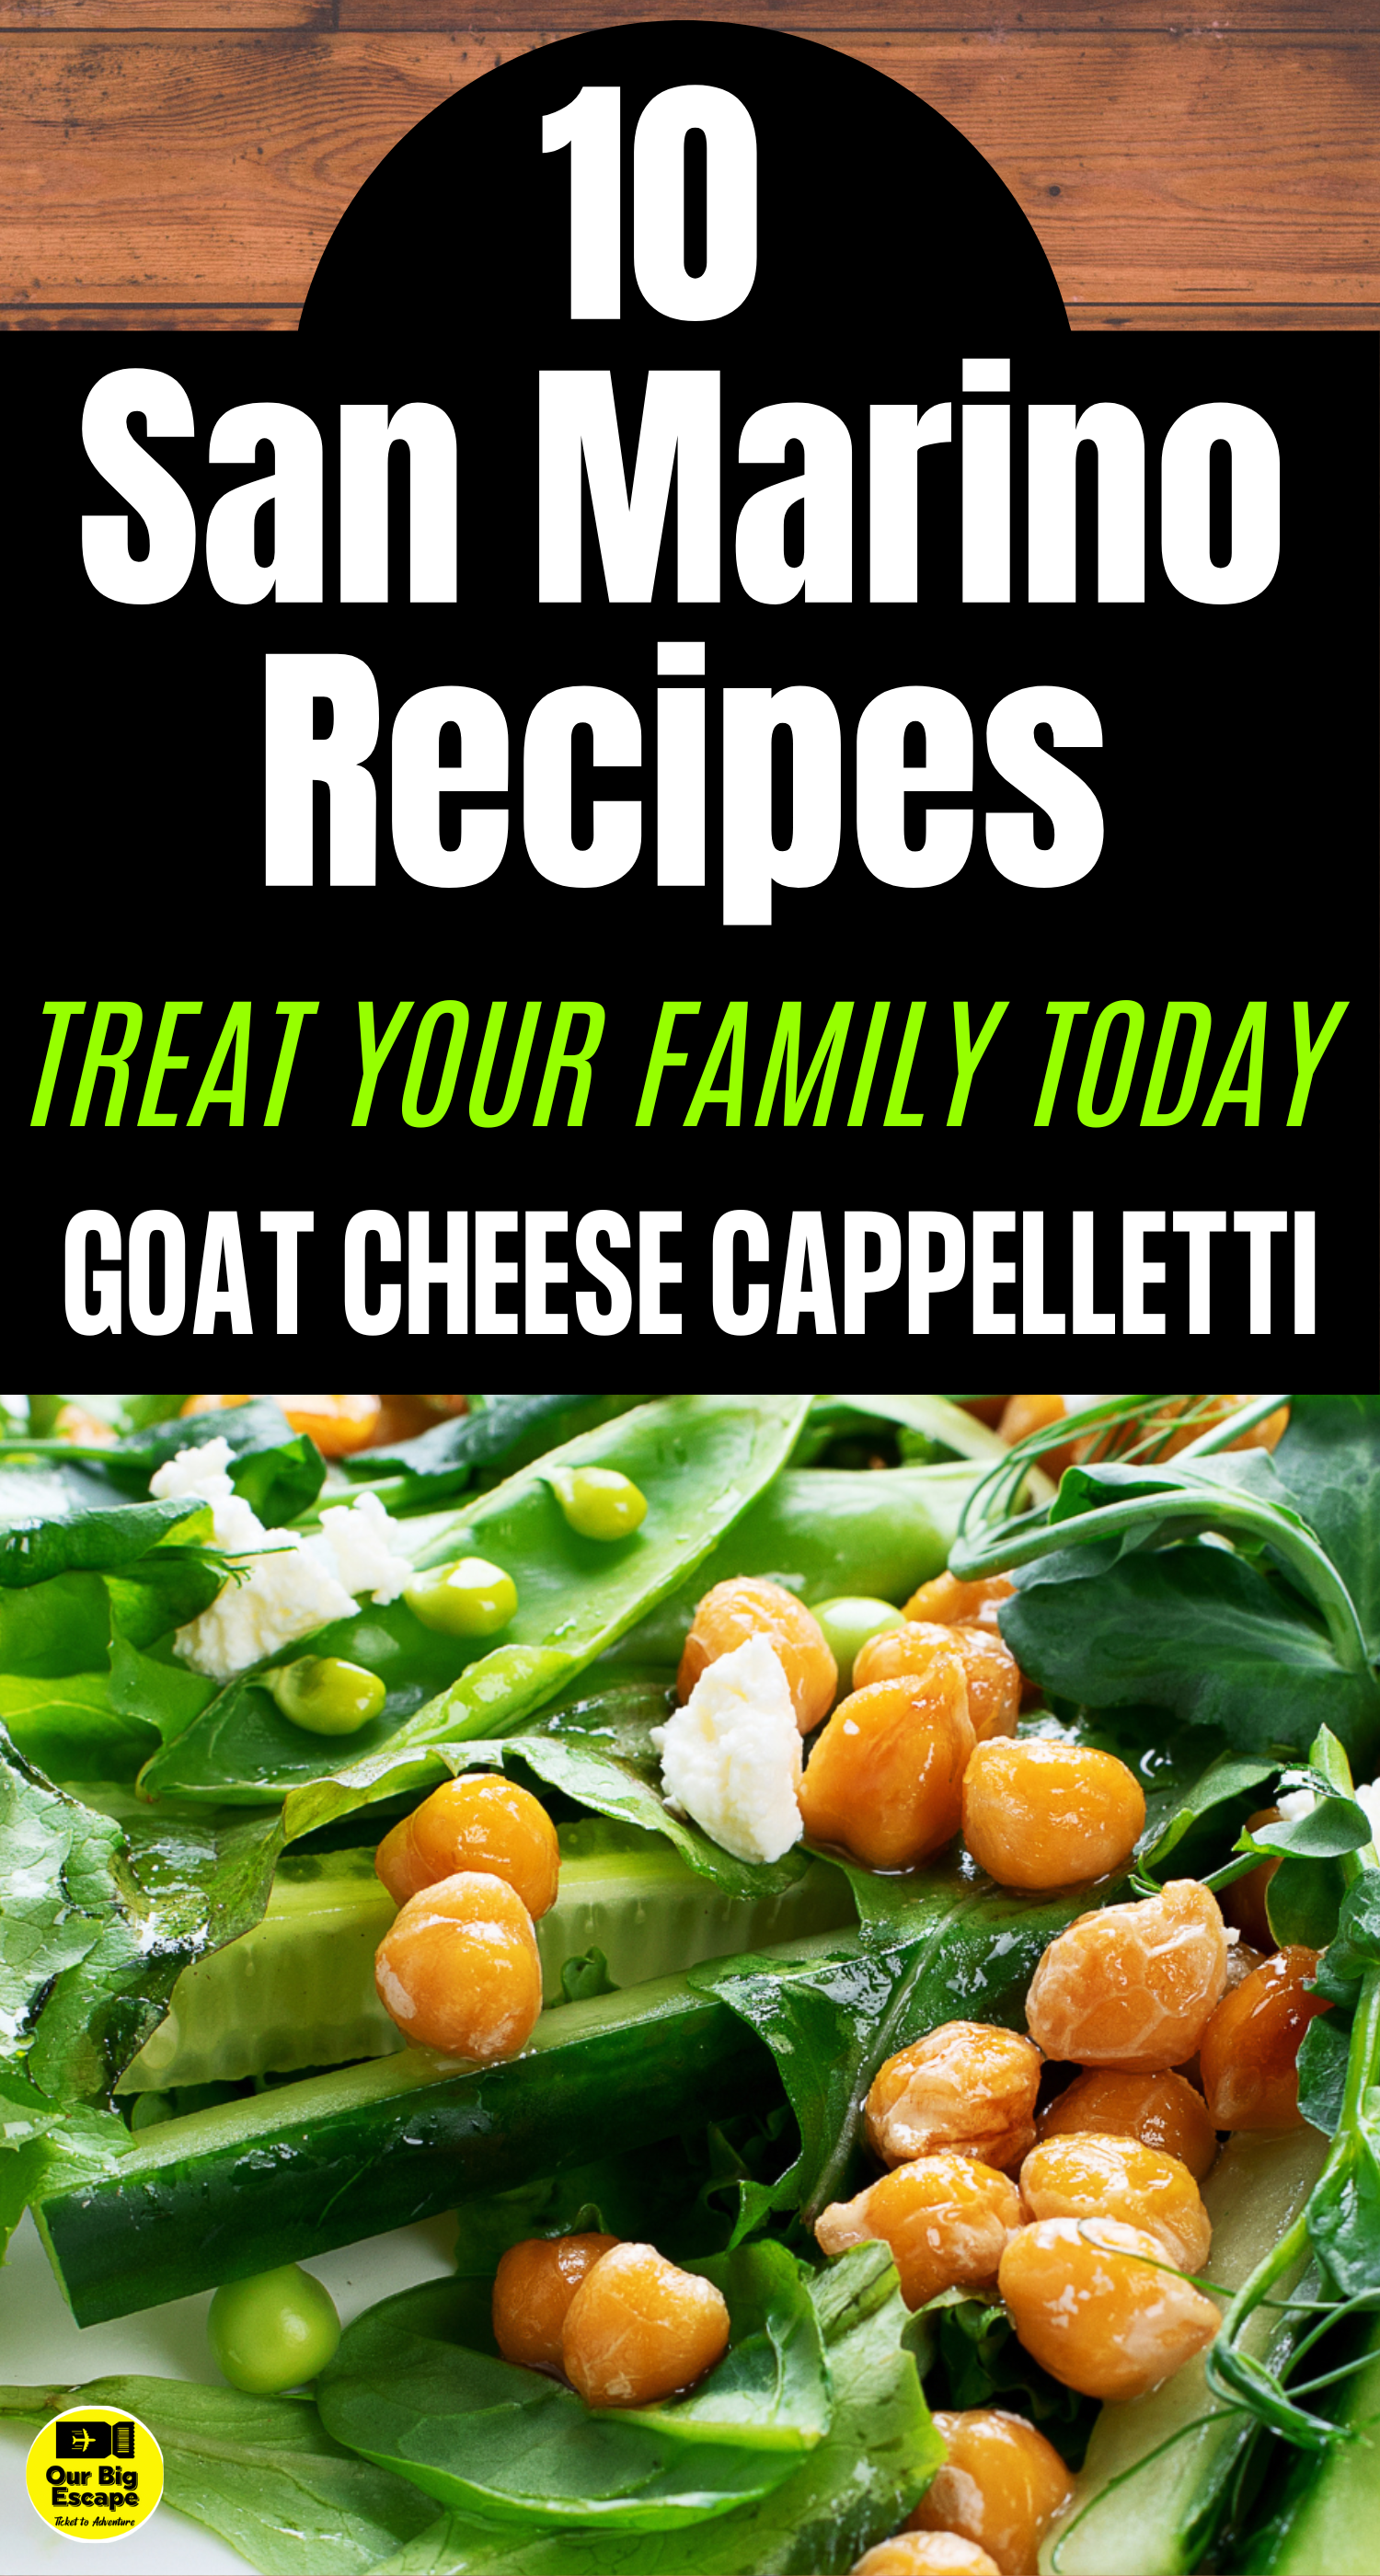 10 San Marino Recipes - Goat Cheese and Herb Cappelletti